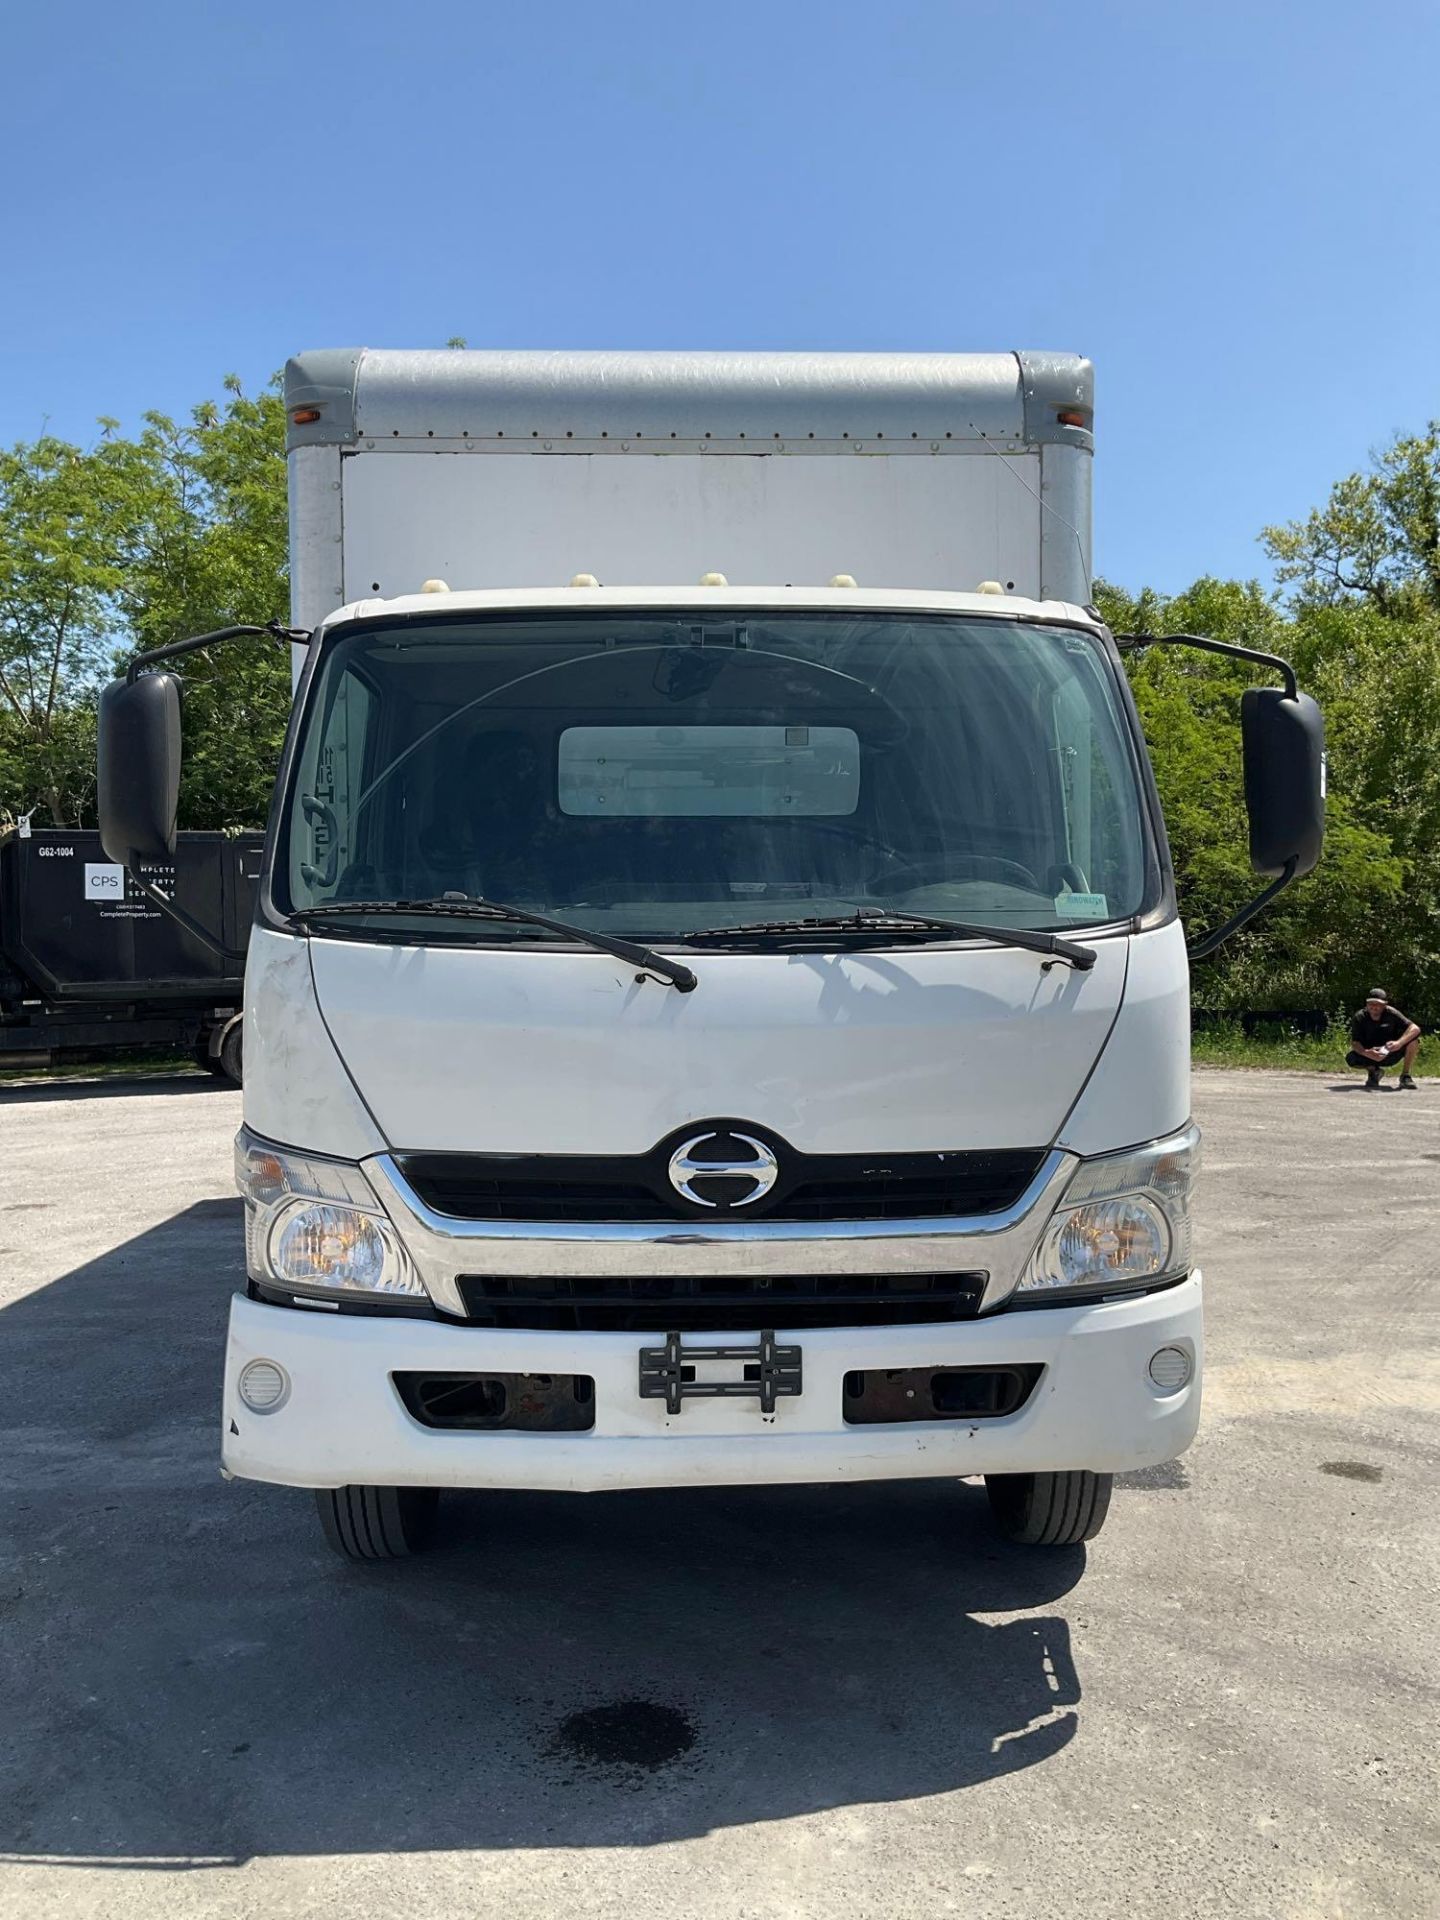 2017 HINO 740 BOX TRUCK , DIESEL , APPROX GVWR 17,950 LBS, BOX BODY APPROX 18FT, ETRACKS, BACK UP... - Image 9 of 29